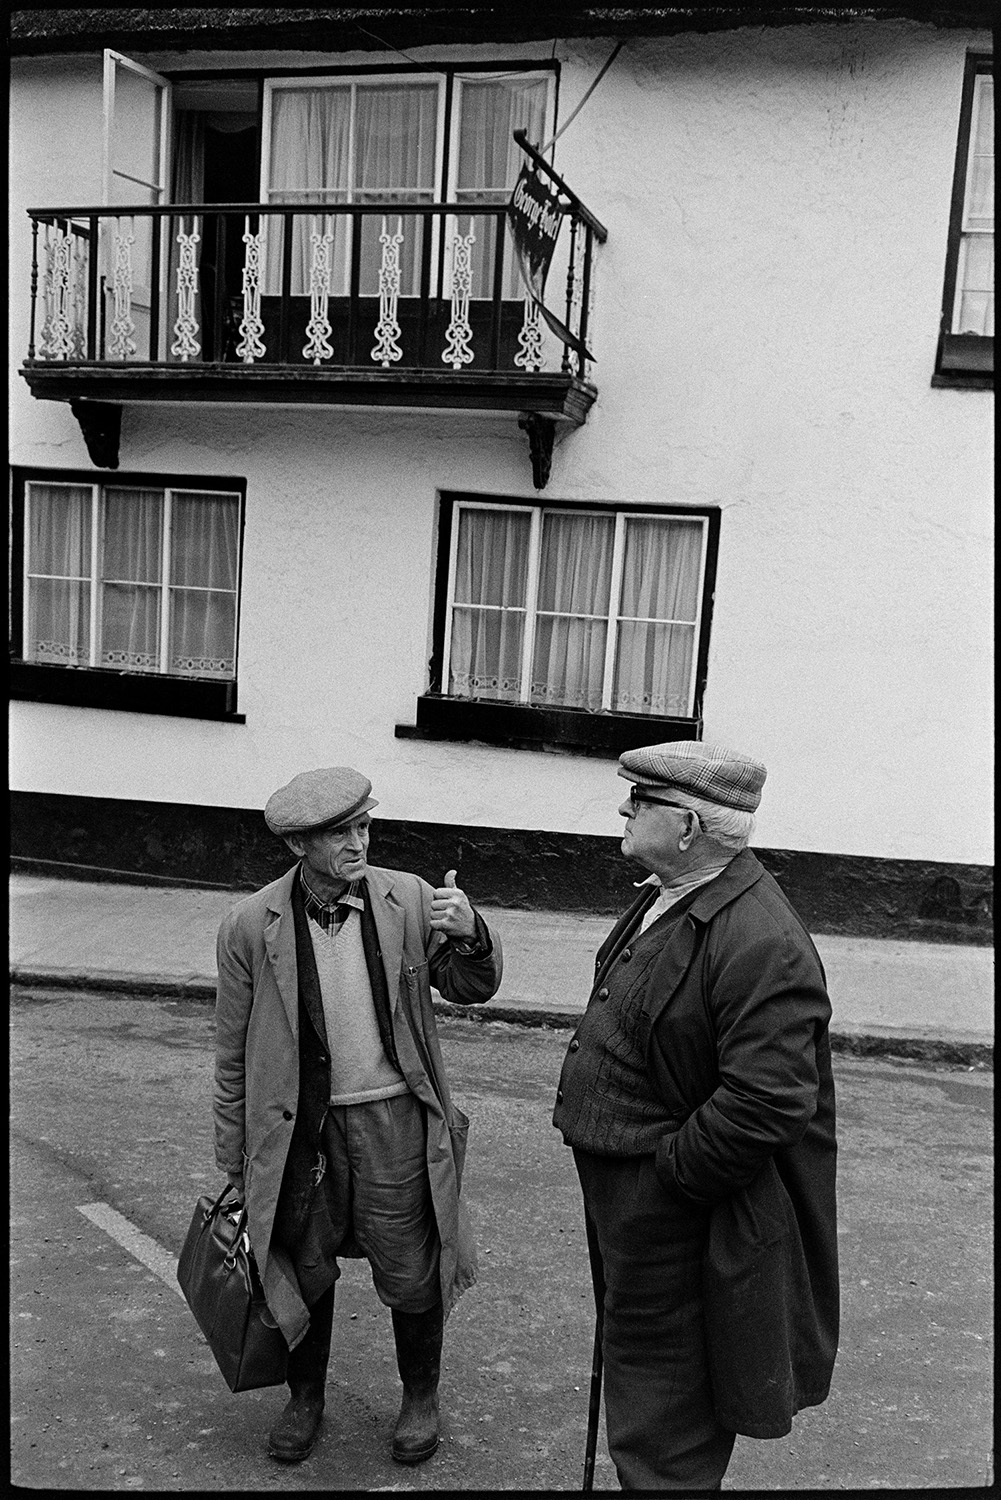 Two men chatting in front of pub. 
[Two men talking in front of the George Hotel in Hatherleigh. A balcony on the hotel is visible in the background.]